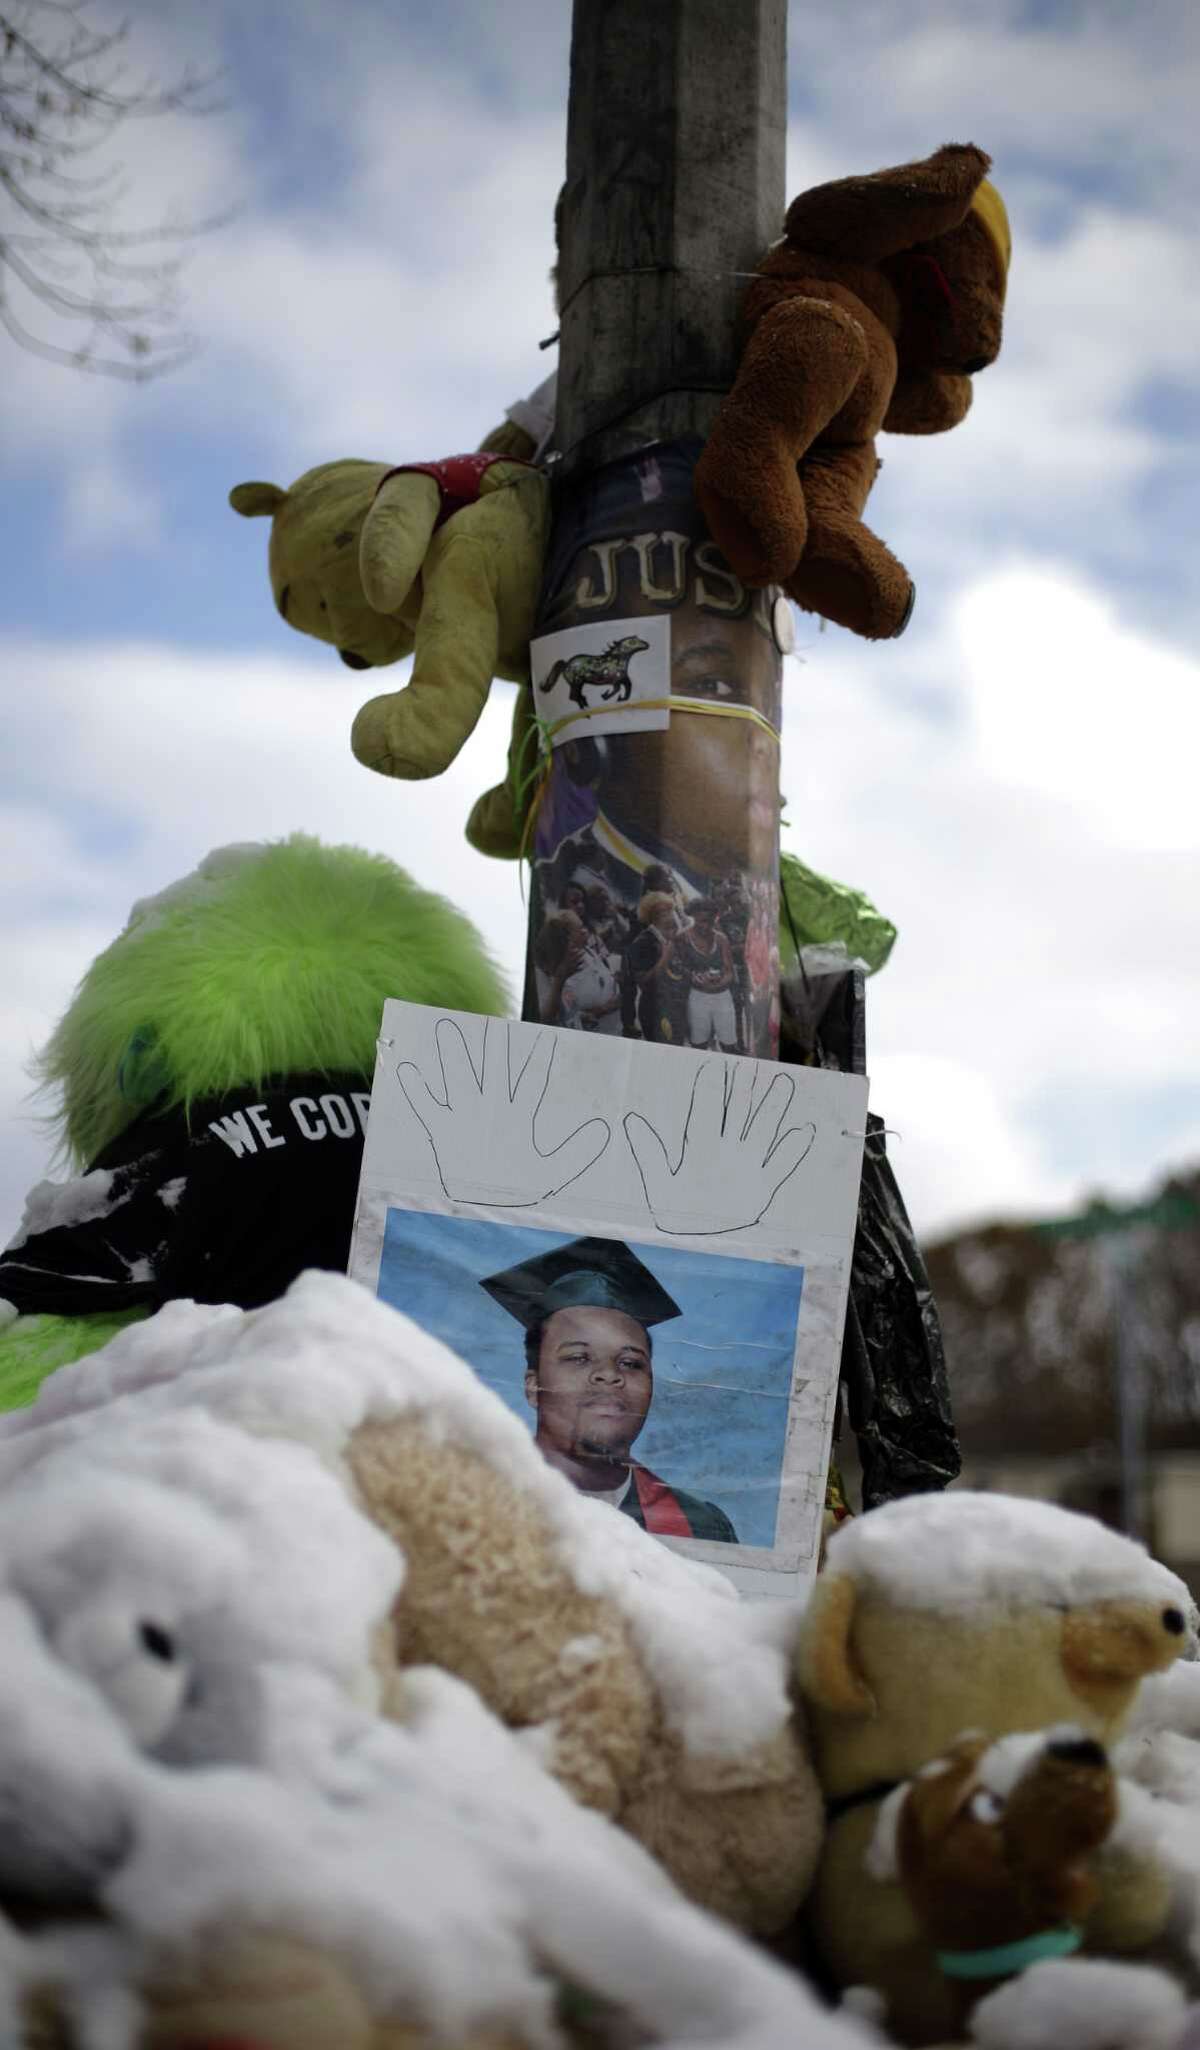 A high school graduation photo of Michael Brown rests on top of a snow-covered memorial Monday, more than three months after the black teen was shot and killed nearby by a white policeman in Ferguson, Mo. The shooting sparked weeks of violent protests and Missouri Governor Jay Nixon declaring a state of emergency today as a grand jury deliberates on whether to charge Ferguson police officer Darren Wilson in the death.